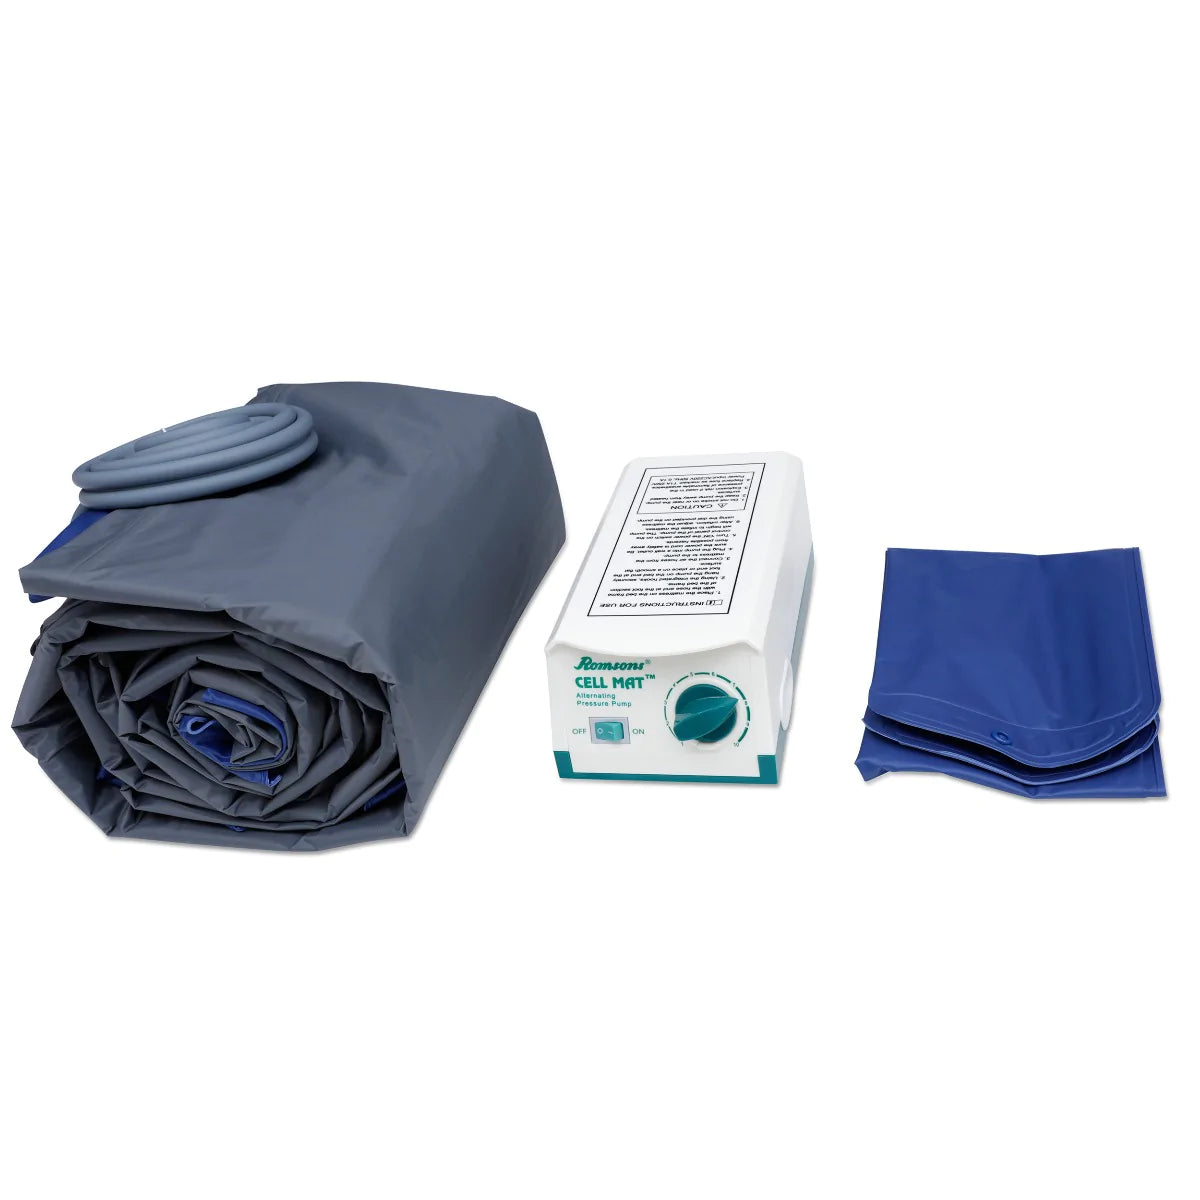 Cell Mat Air Mattress with Air Pump for Prevention of Bed Sore